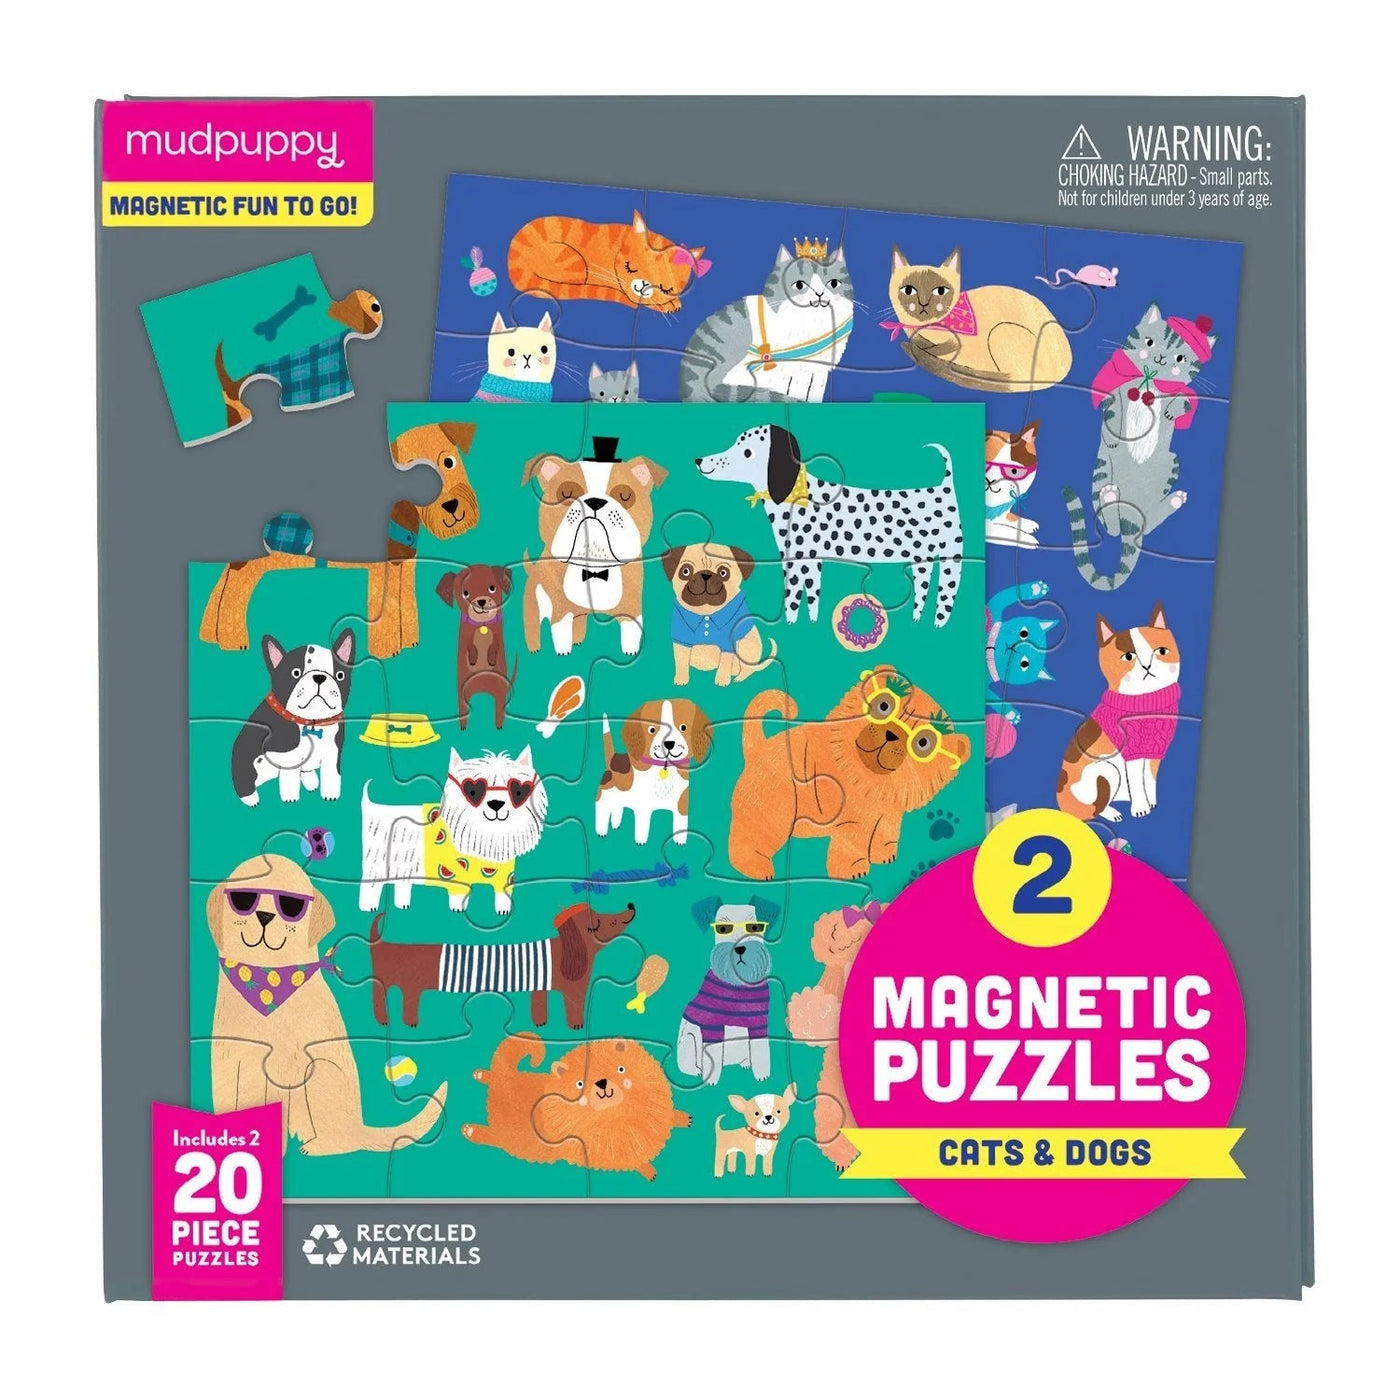 Mudpuppy Magnetic Puzzle - Cats & Dogs Puzzle Mudpuppy 